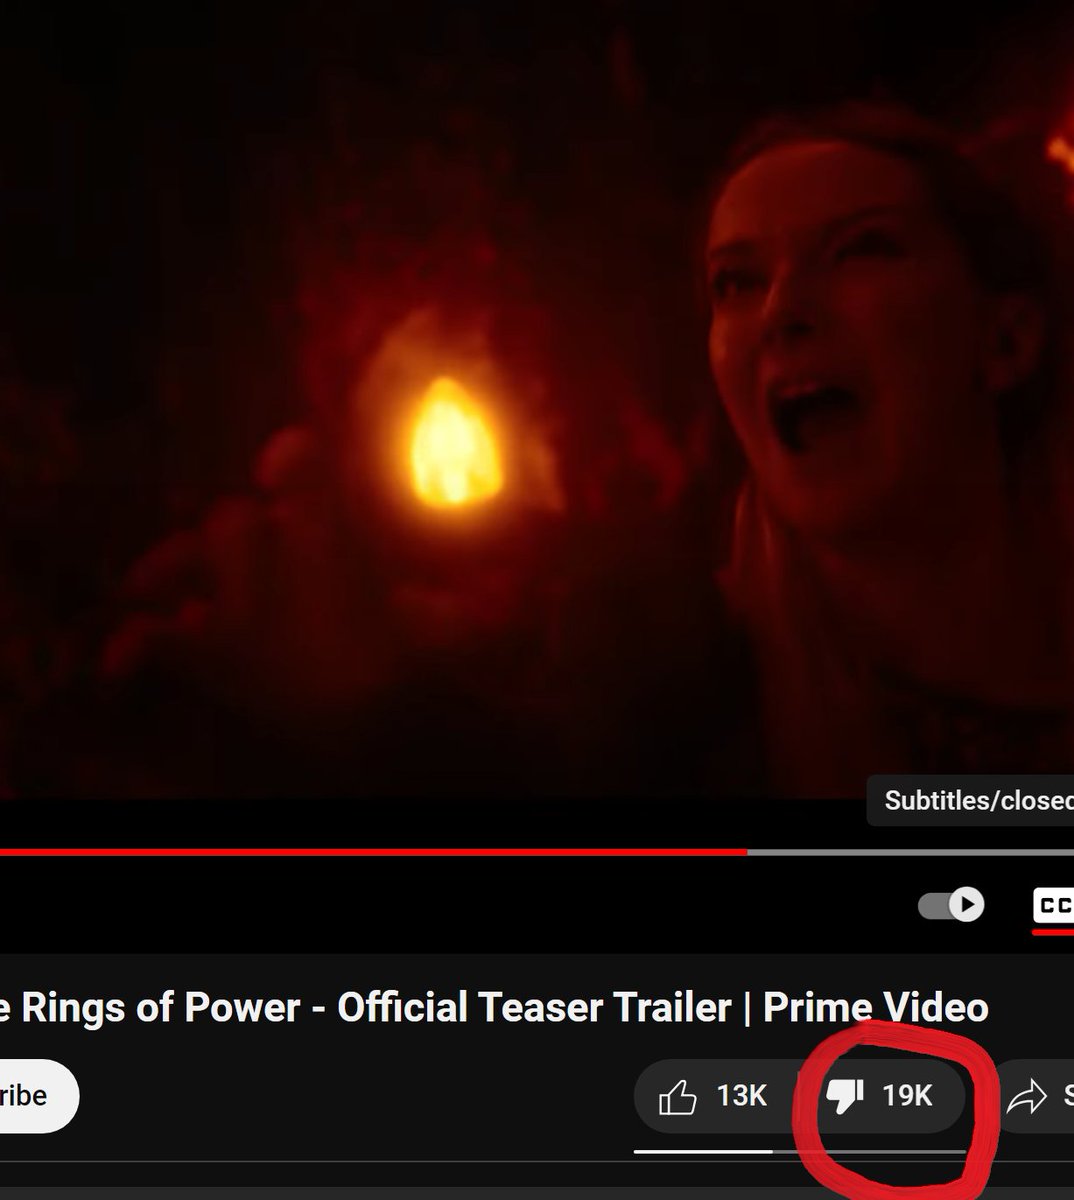 The Rings of Power already ratioed
#TheRingsOfPowerS2